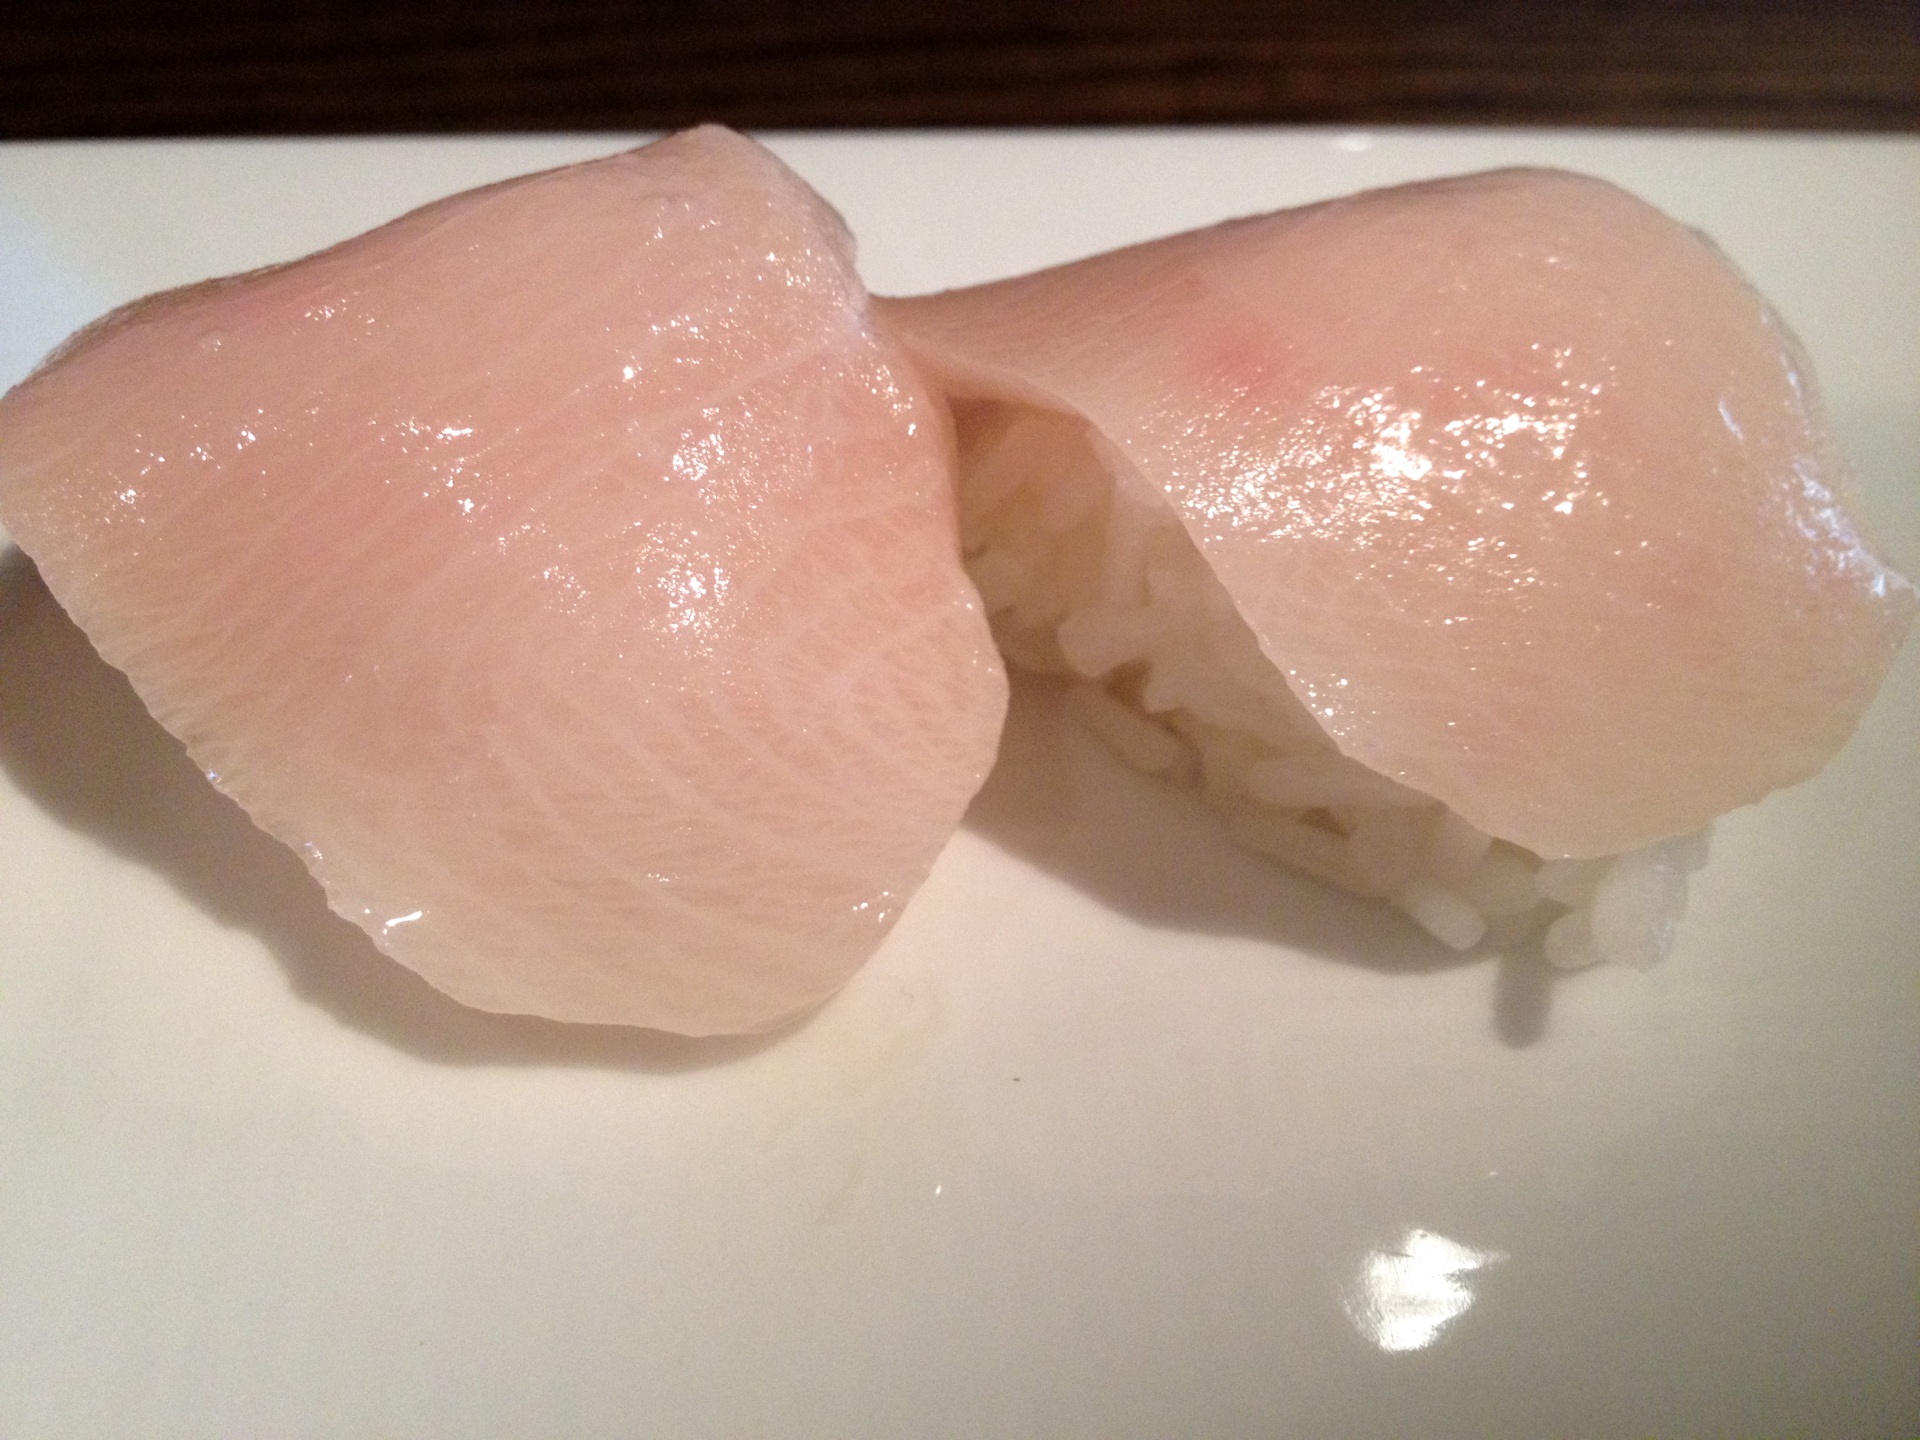 SUGARFISH’s shari-What is this I don't even - The Offalo